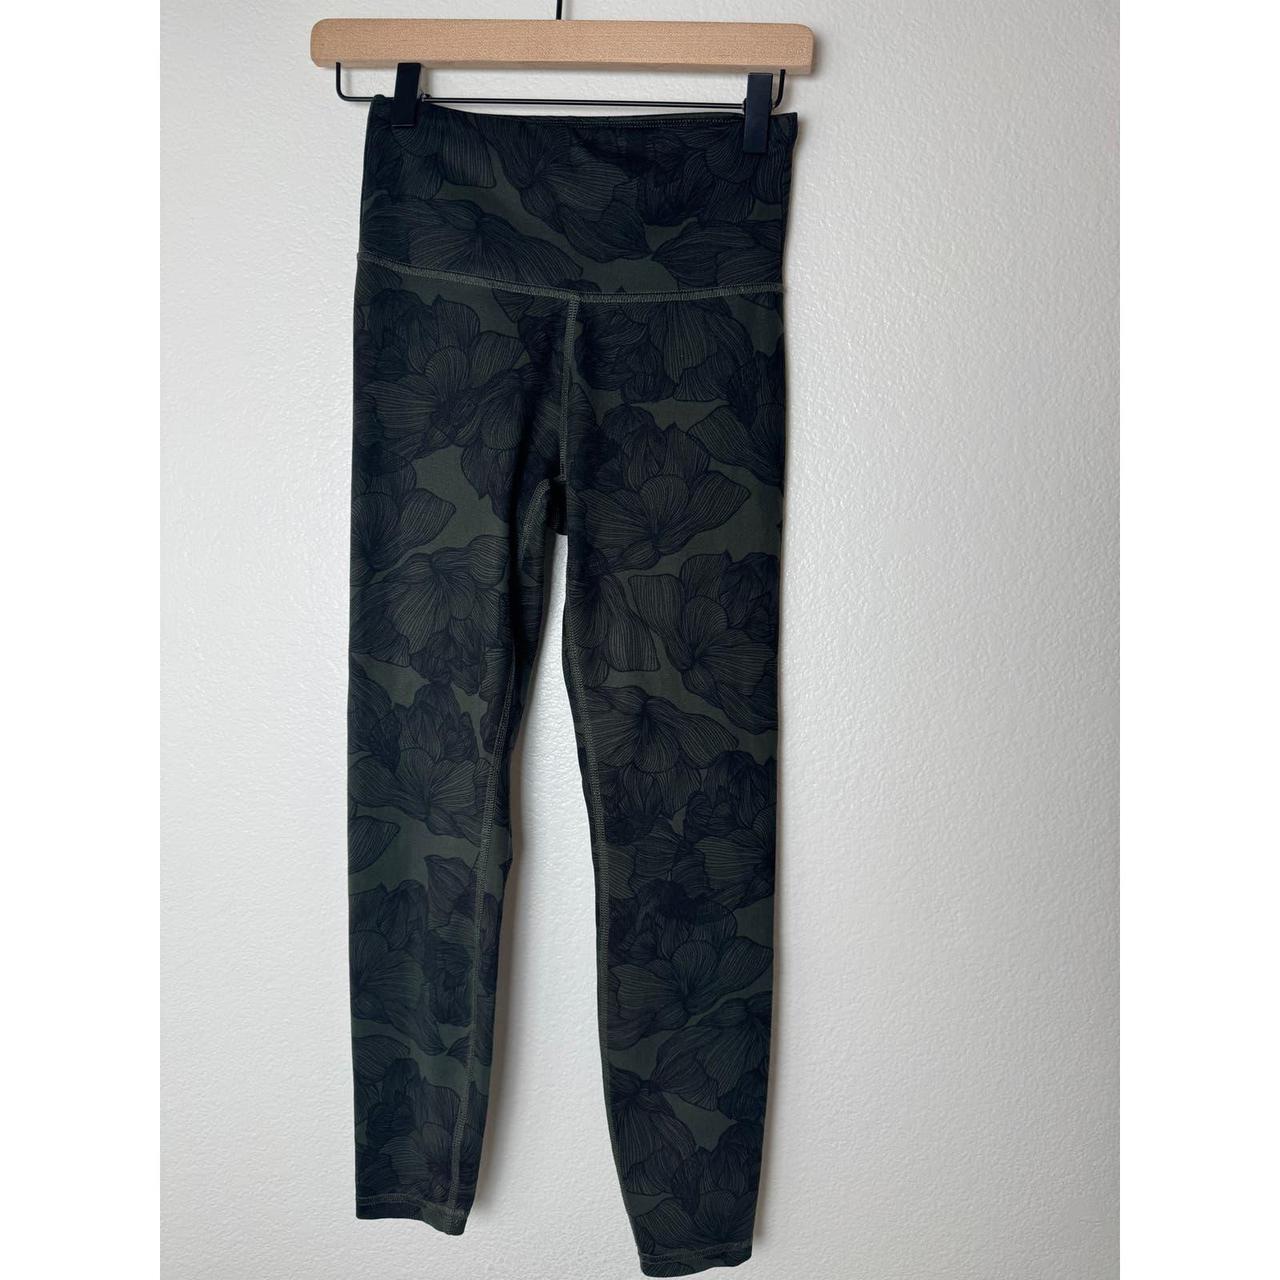 Balance collection, yoga pants, size small. Olive - Depop